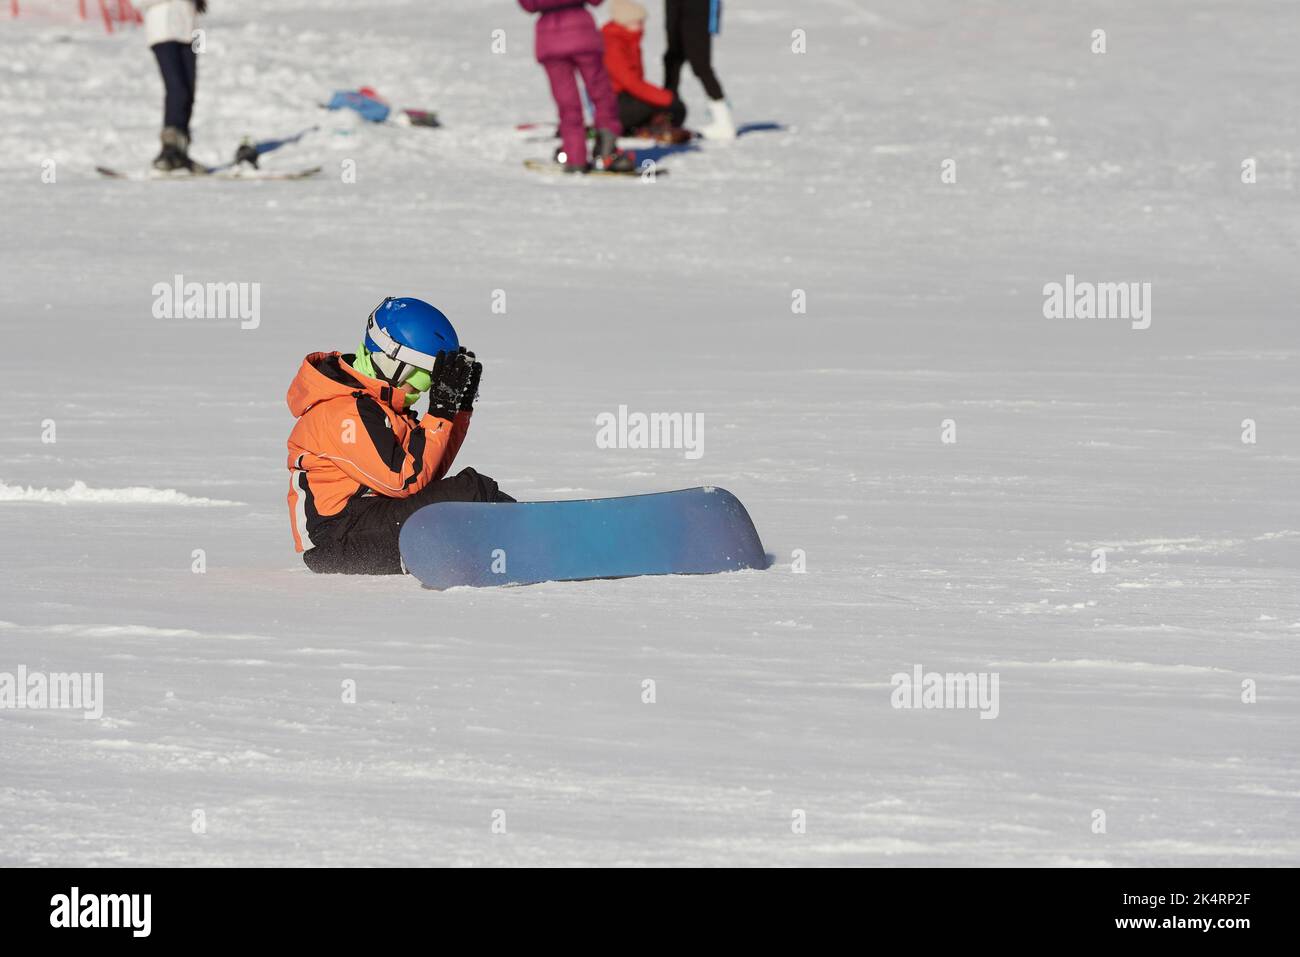 Young snowboarder failed on the ski slope and sits on the snow. Stock Photo